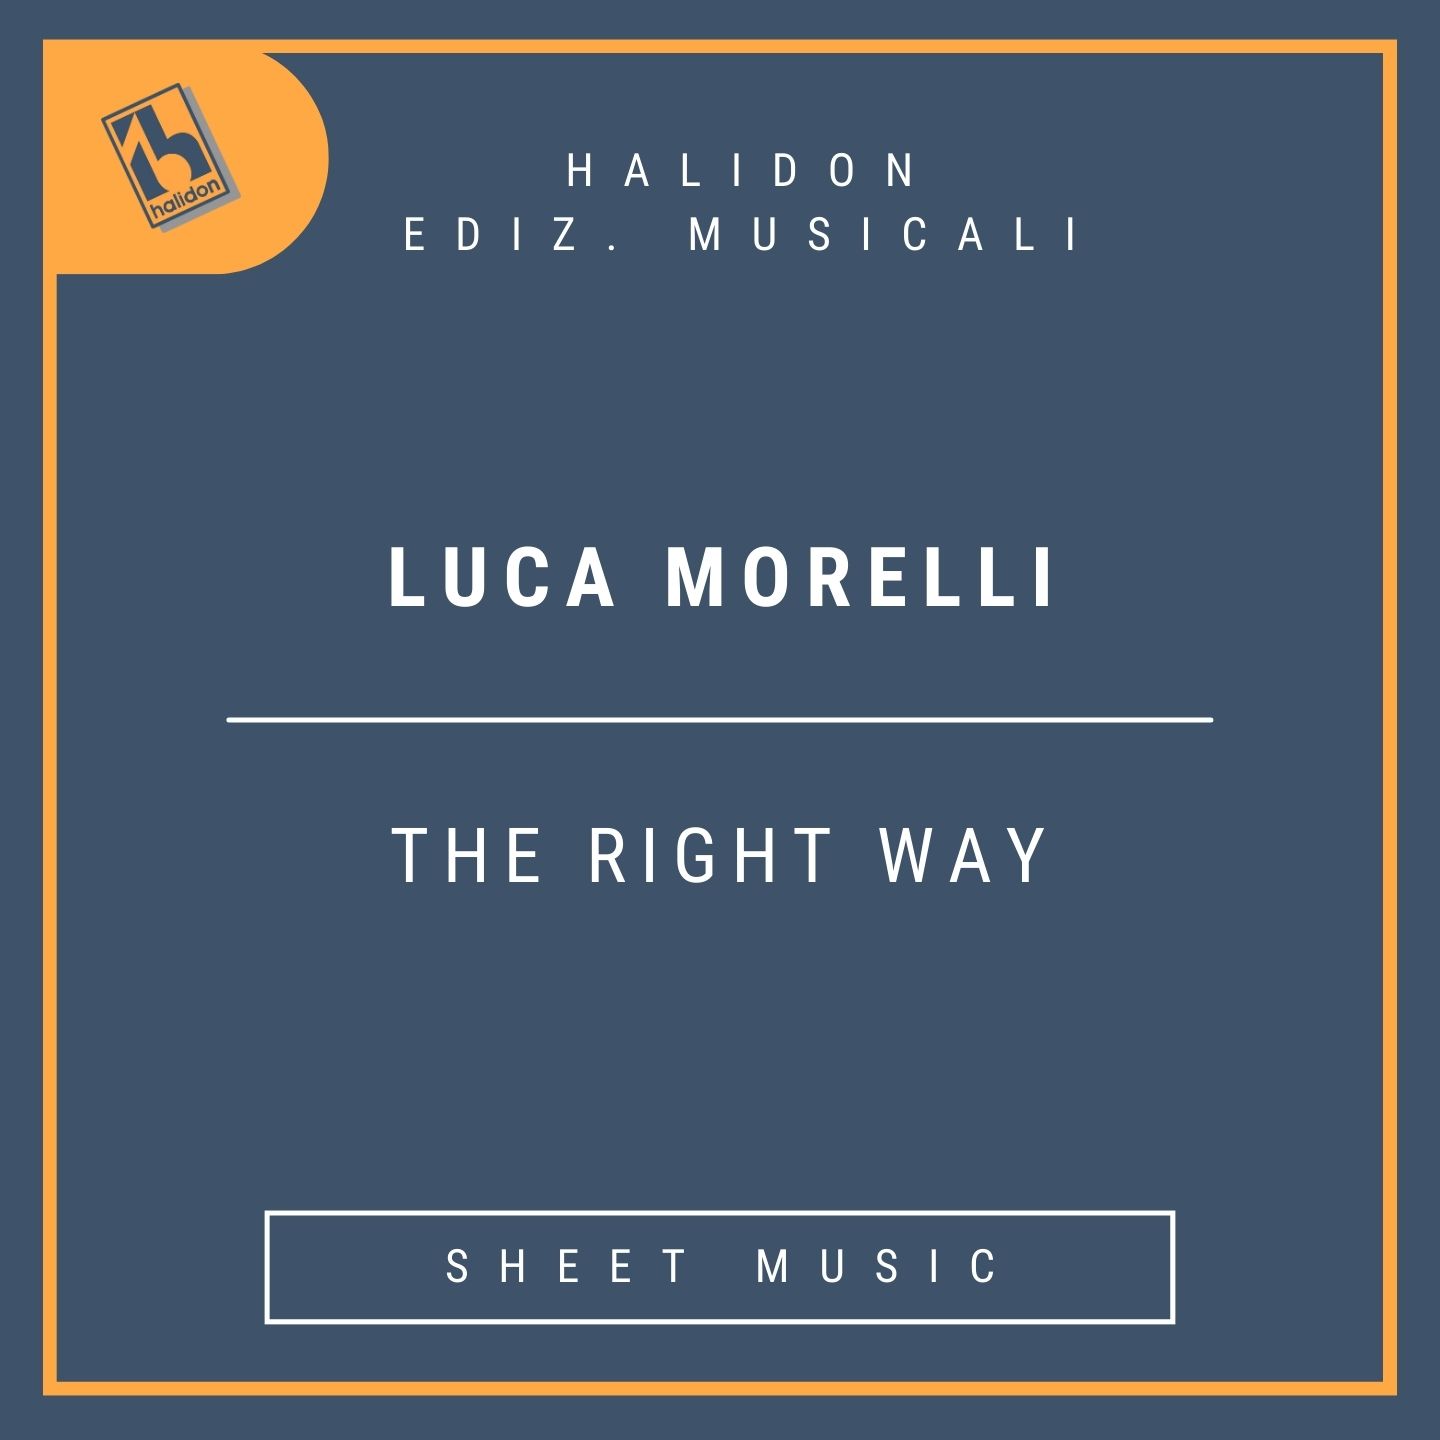 Luca Morelli - The Right Way